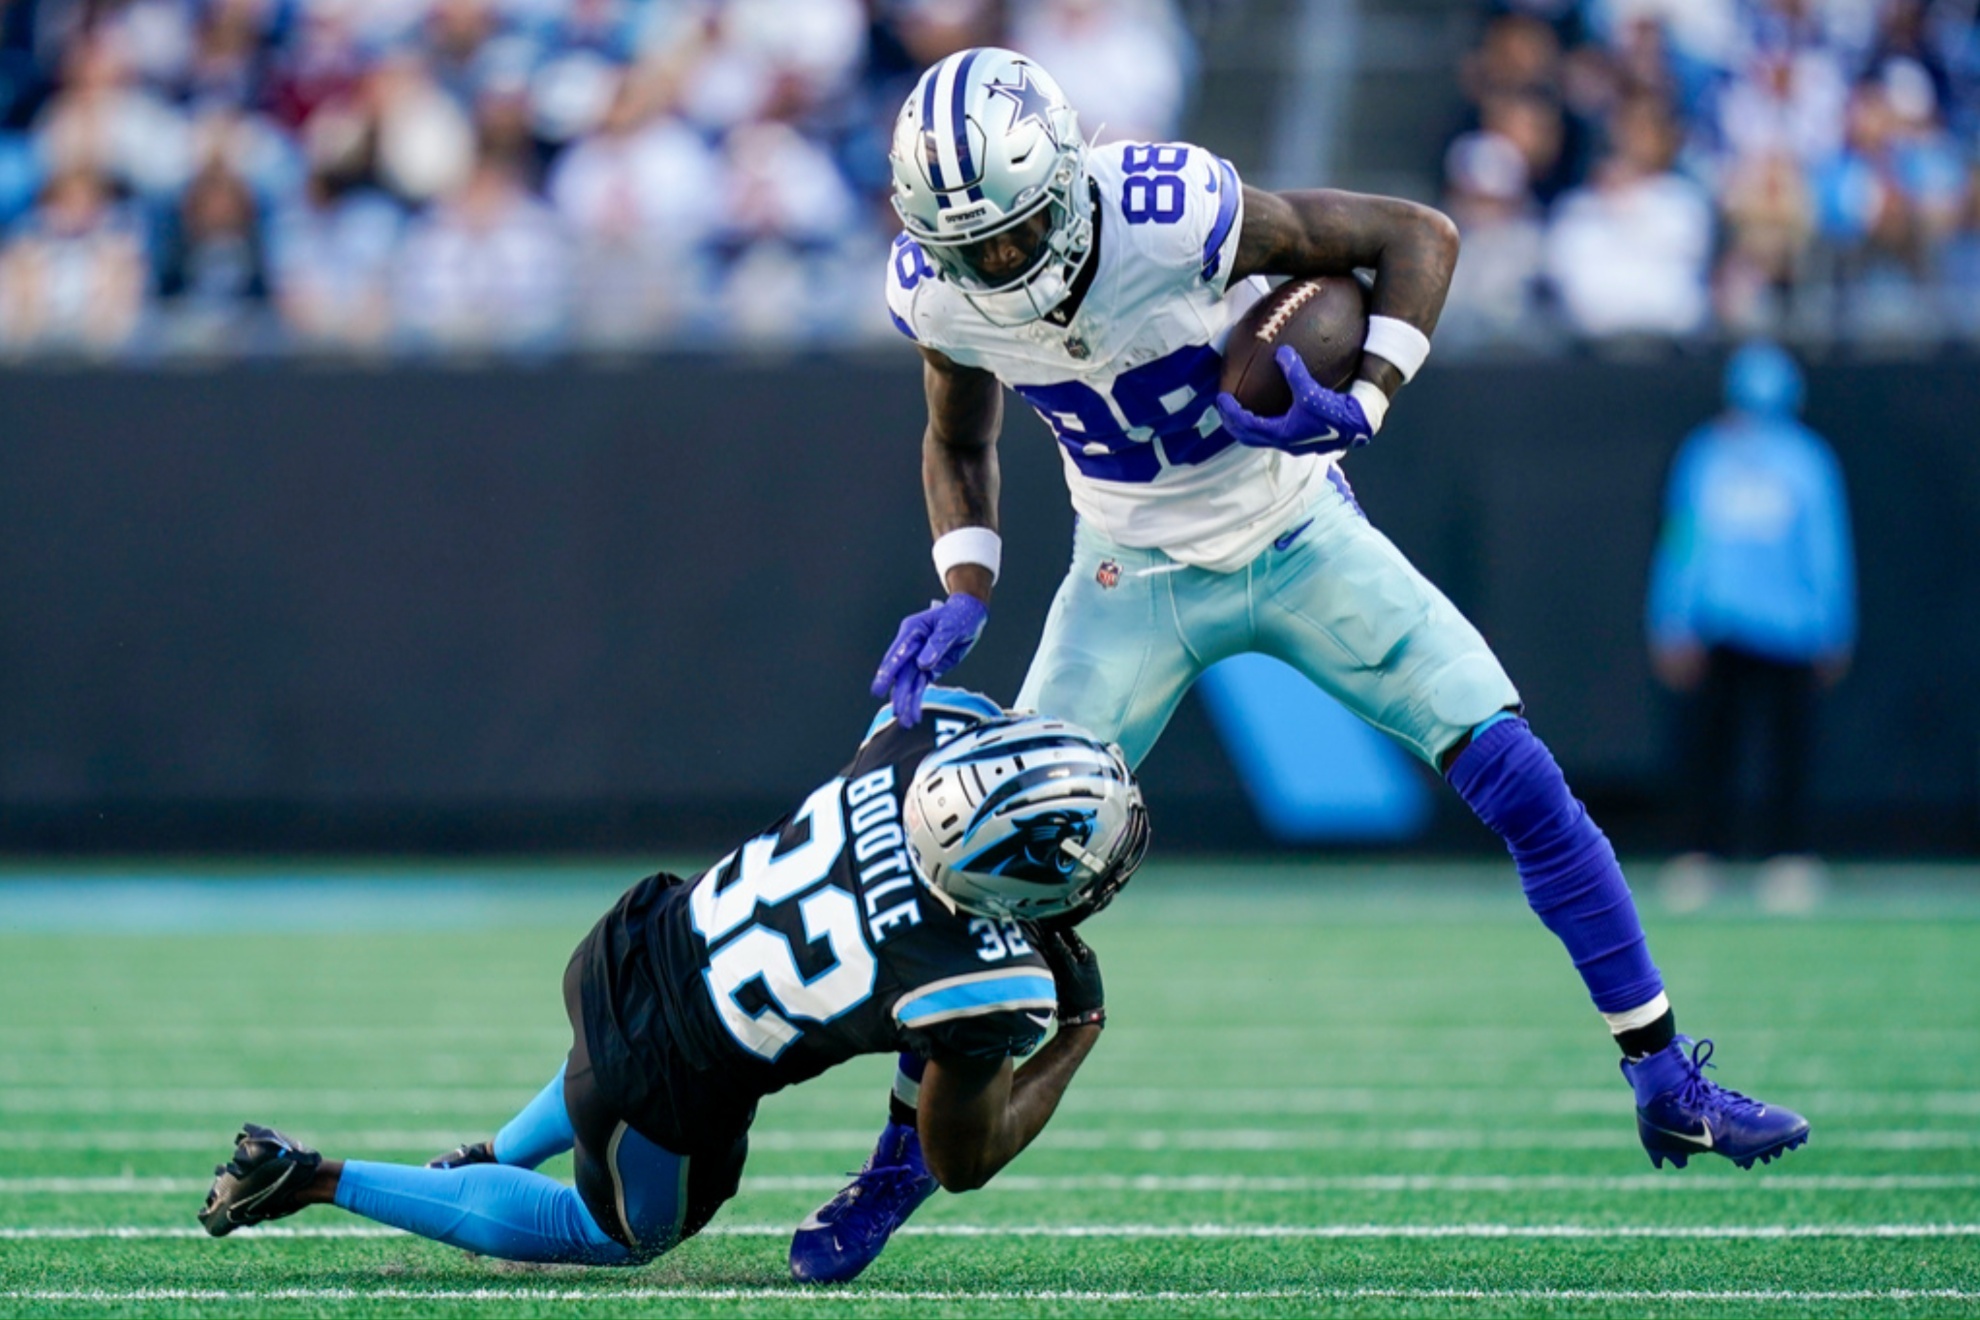 CeeDee Lamb (88) tackled by Dicaprio Bootle (32) at the Cowboys-Panthers game.